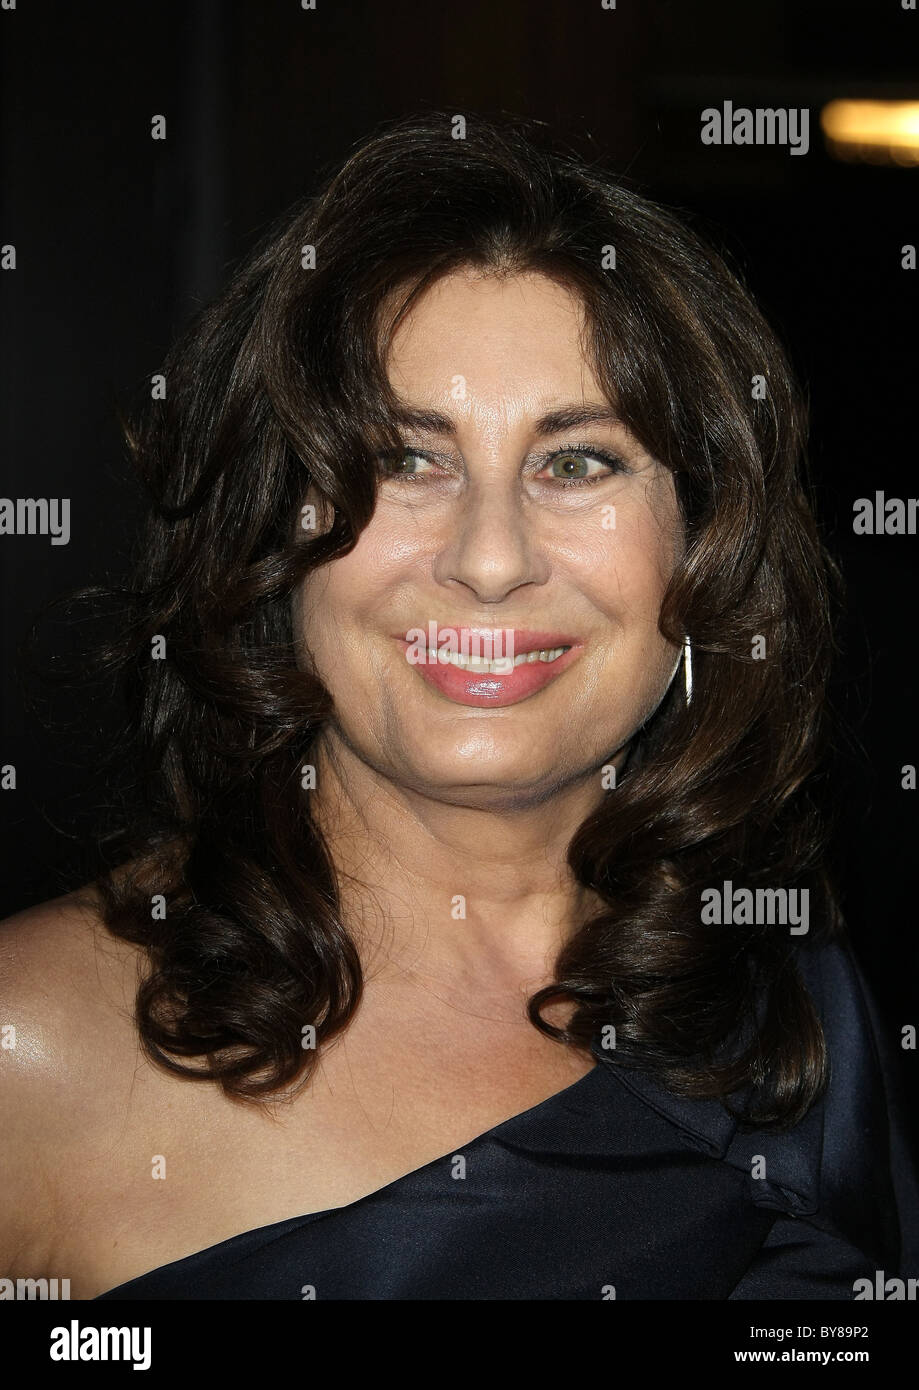 PAULA WAGNER 22ND ANNUAL PRODUCERS GUILD OF AMERICA AWARDS BEVERLY HILLS LOS ANGELES CALIFORNIA USA 22 January 2011 Stock Photo